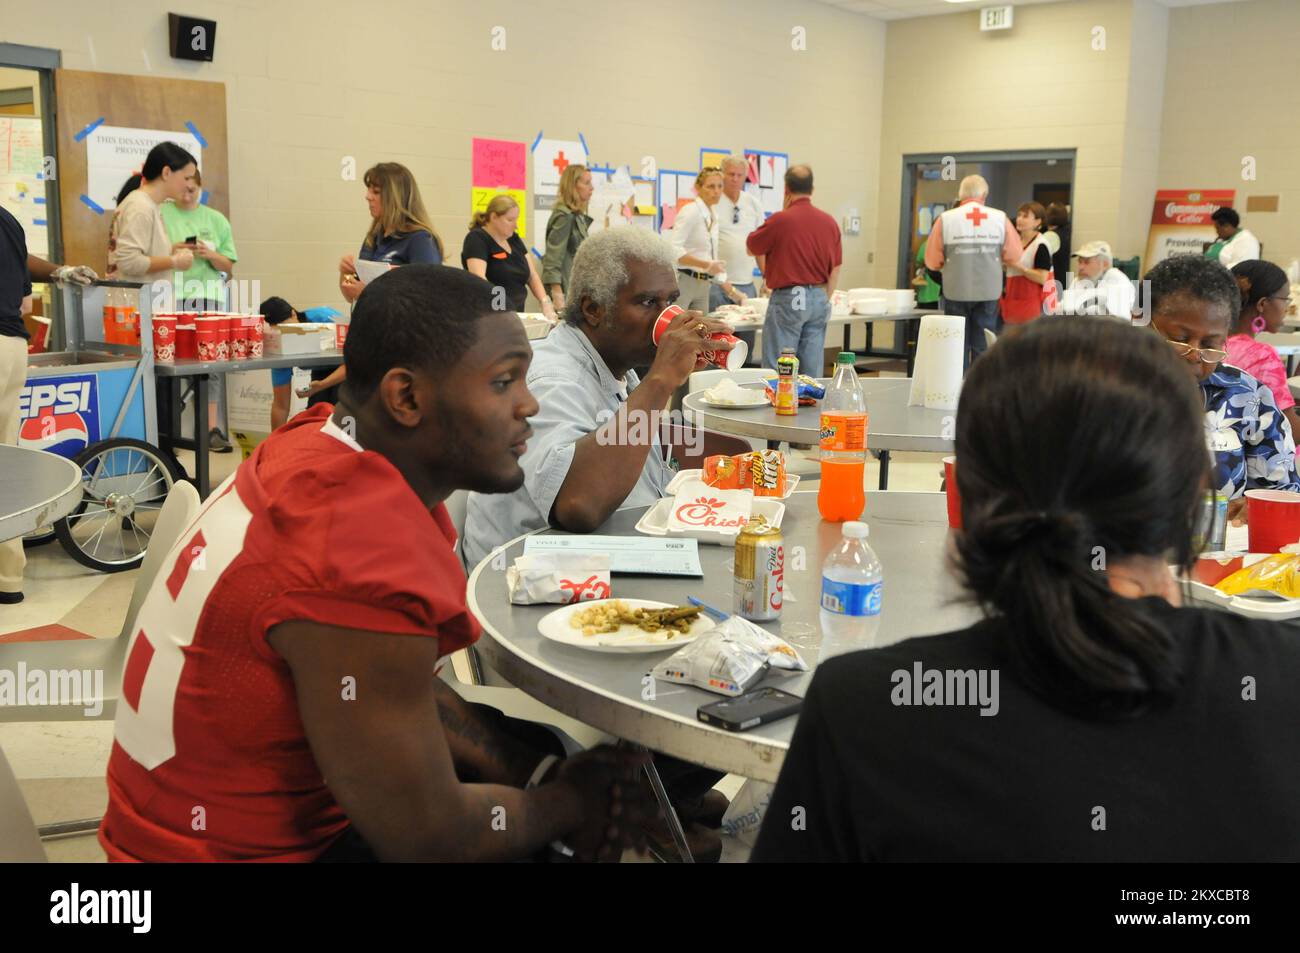 Tornado - Tuscaloosa, Ala. , May 6, 2011   University of Alabama Football All-American Javier Arenas has lunch with volunteers at the Tuscaloosa Red Cross Shelter. Javier passed out FEMA registration flyers, signed autographs, and posed for pictures with fans to help raise the spirits of people who have lost nearly everything. FEMA Photo /Tim Burkitt.. Photographs Relating to Disasters and Emergency Management Programs, Activities, and Officials Stock Photo